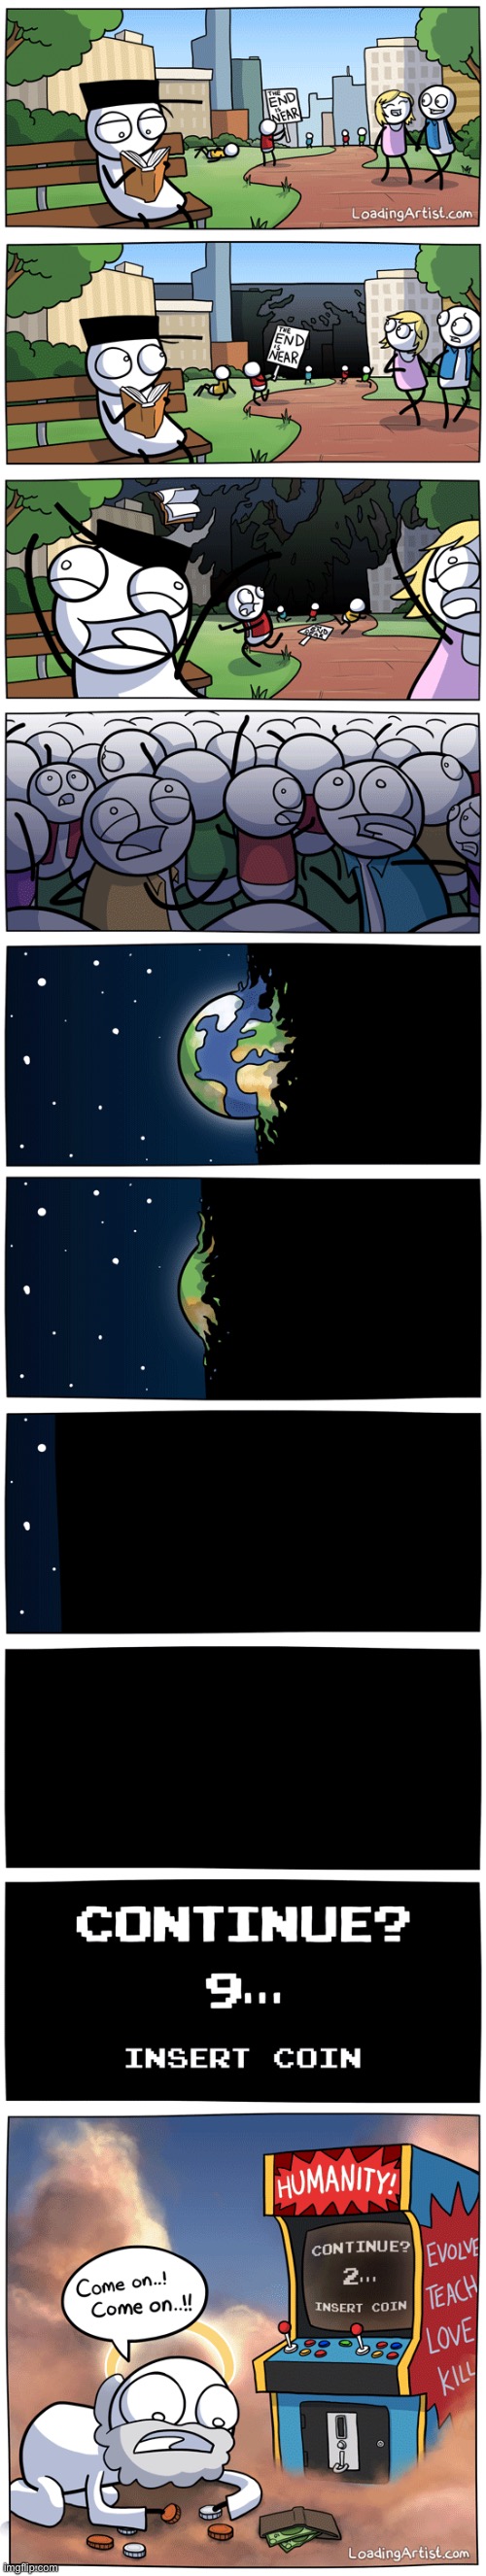 You better get that coin in there god! | image tagged in memes,funny,comics,earth,end of the world,oooop | made w/ Imgflip meme maker